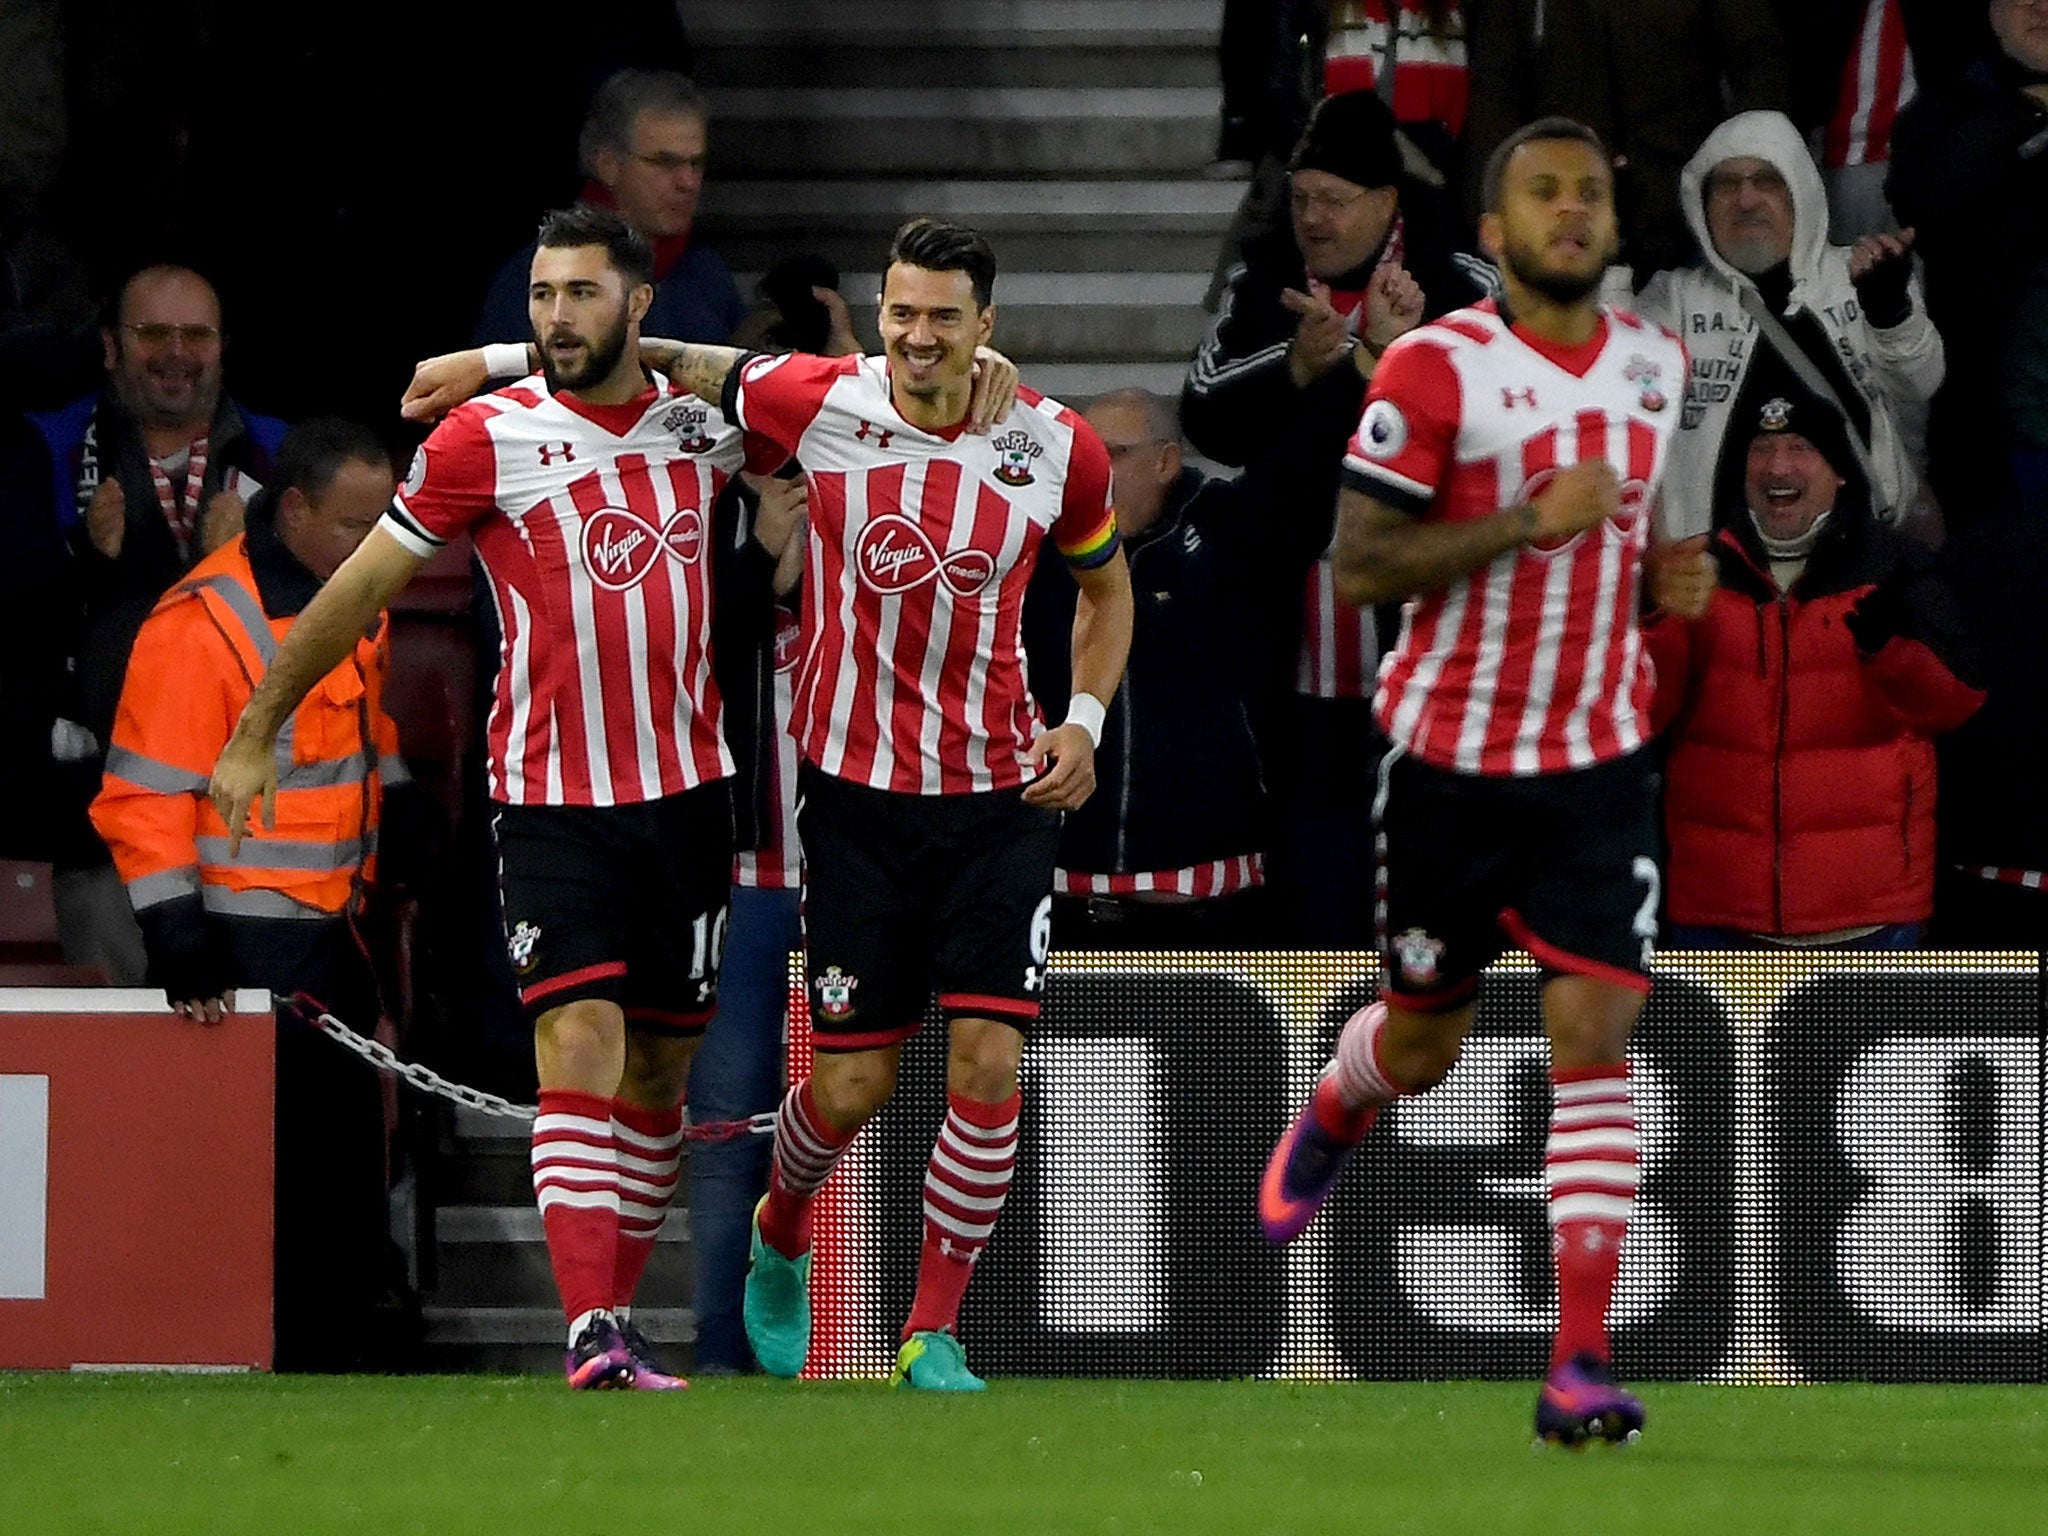 Southampton vs Everton match report: Saints hold out for all three ...